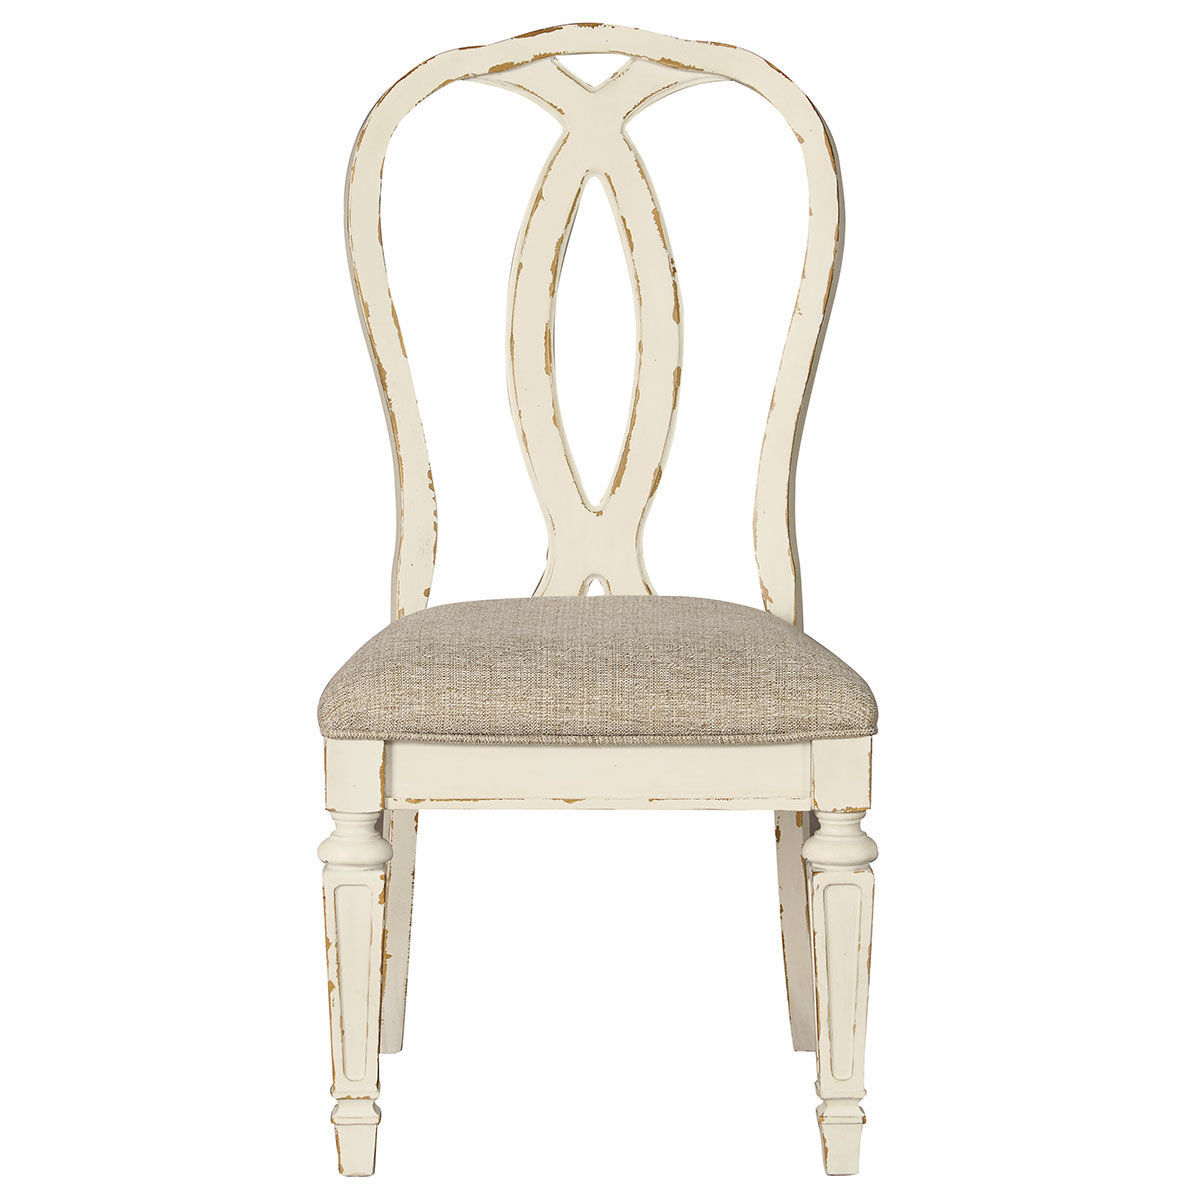 Picture of ROSLYN CURVED BACK SIDE CHAIR